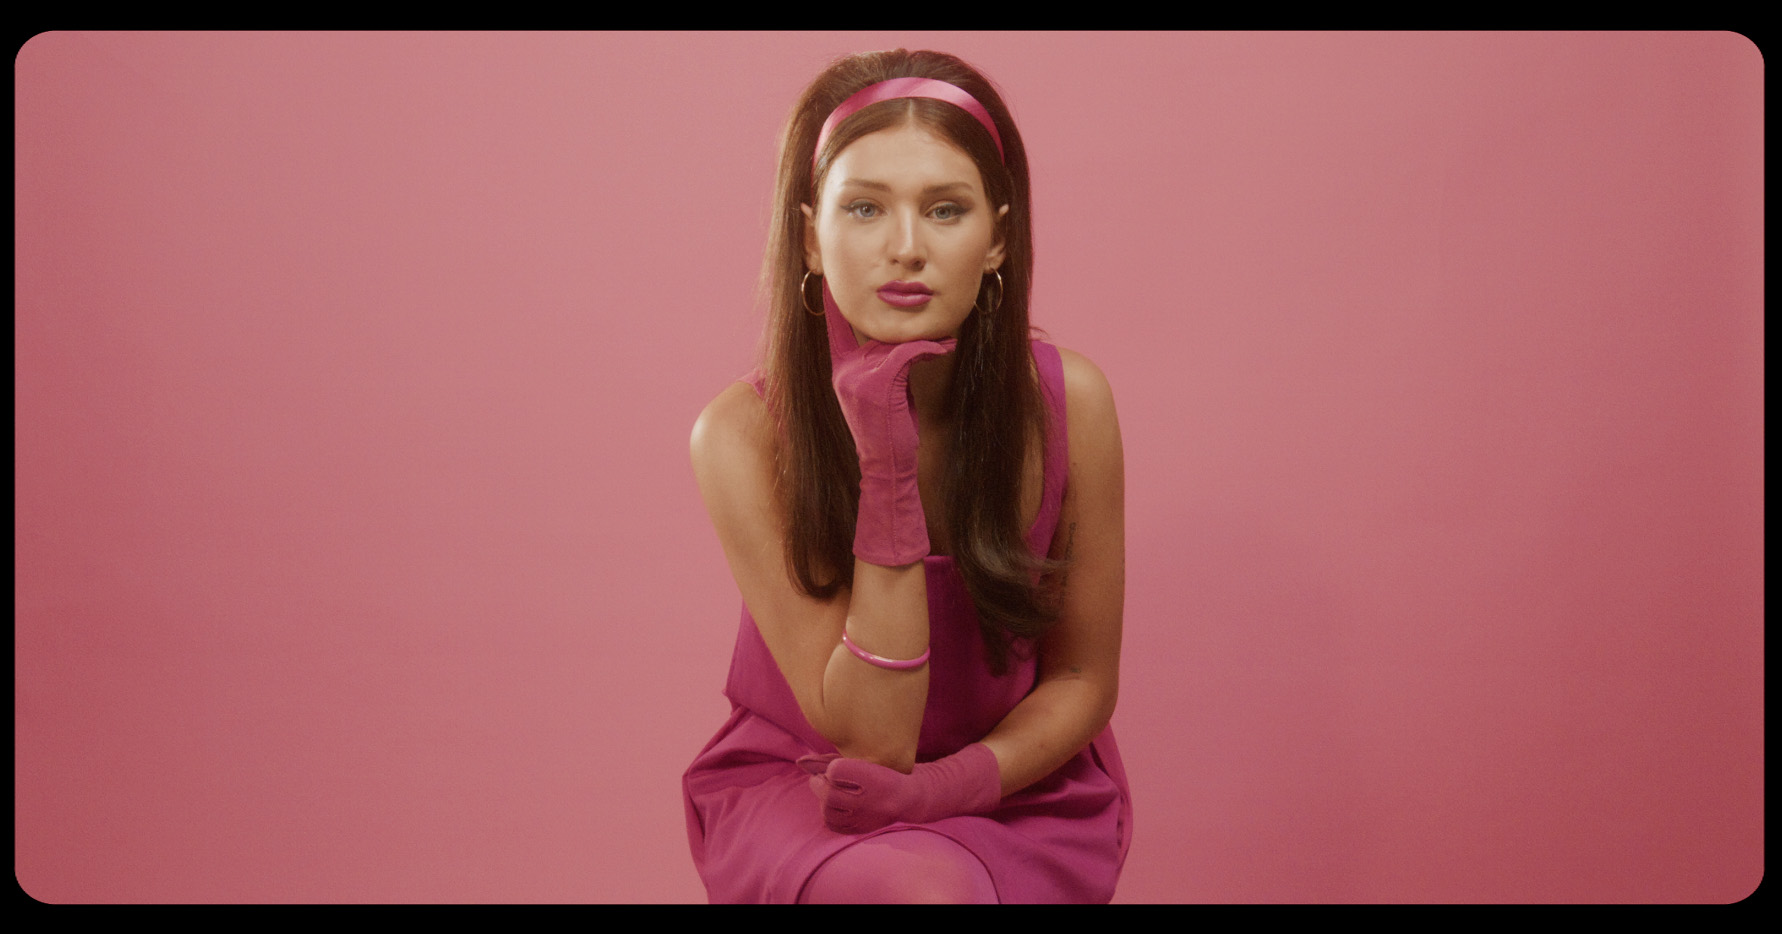 From the Don’t Call Me music video: maryjo in pink retro attire.